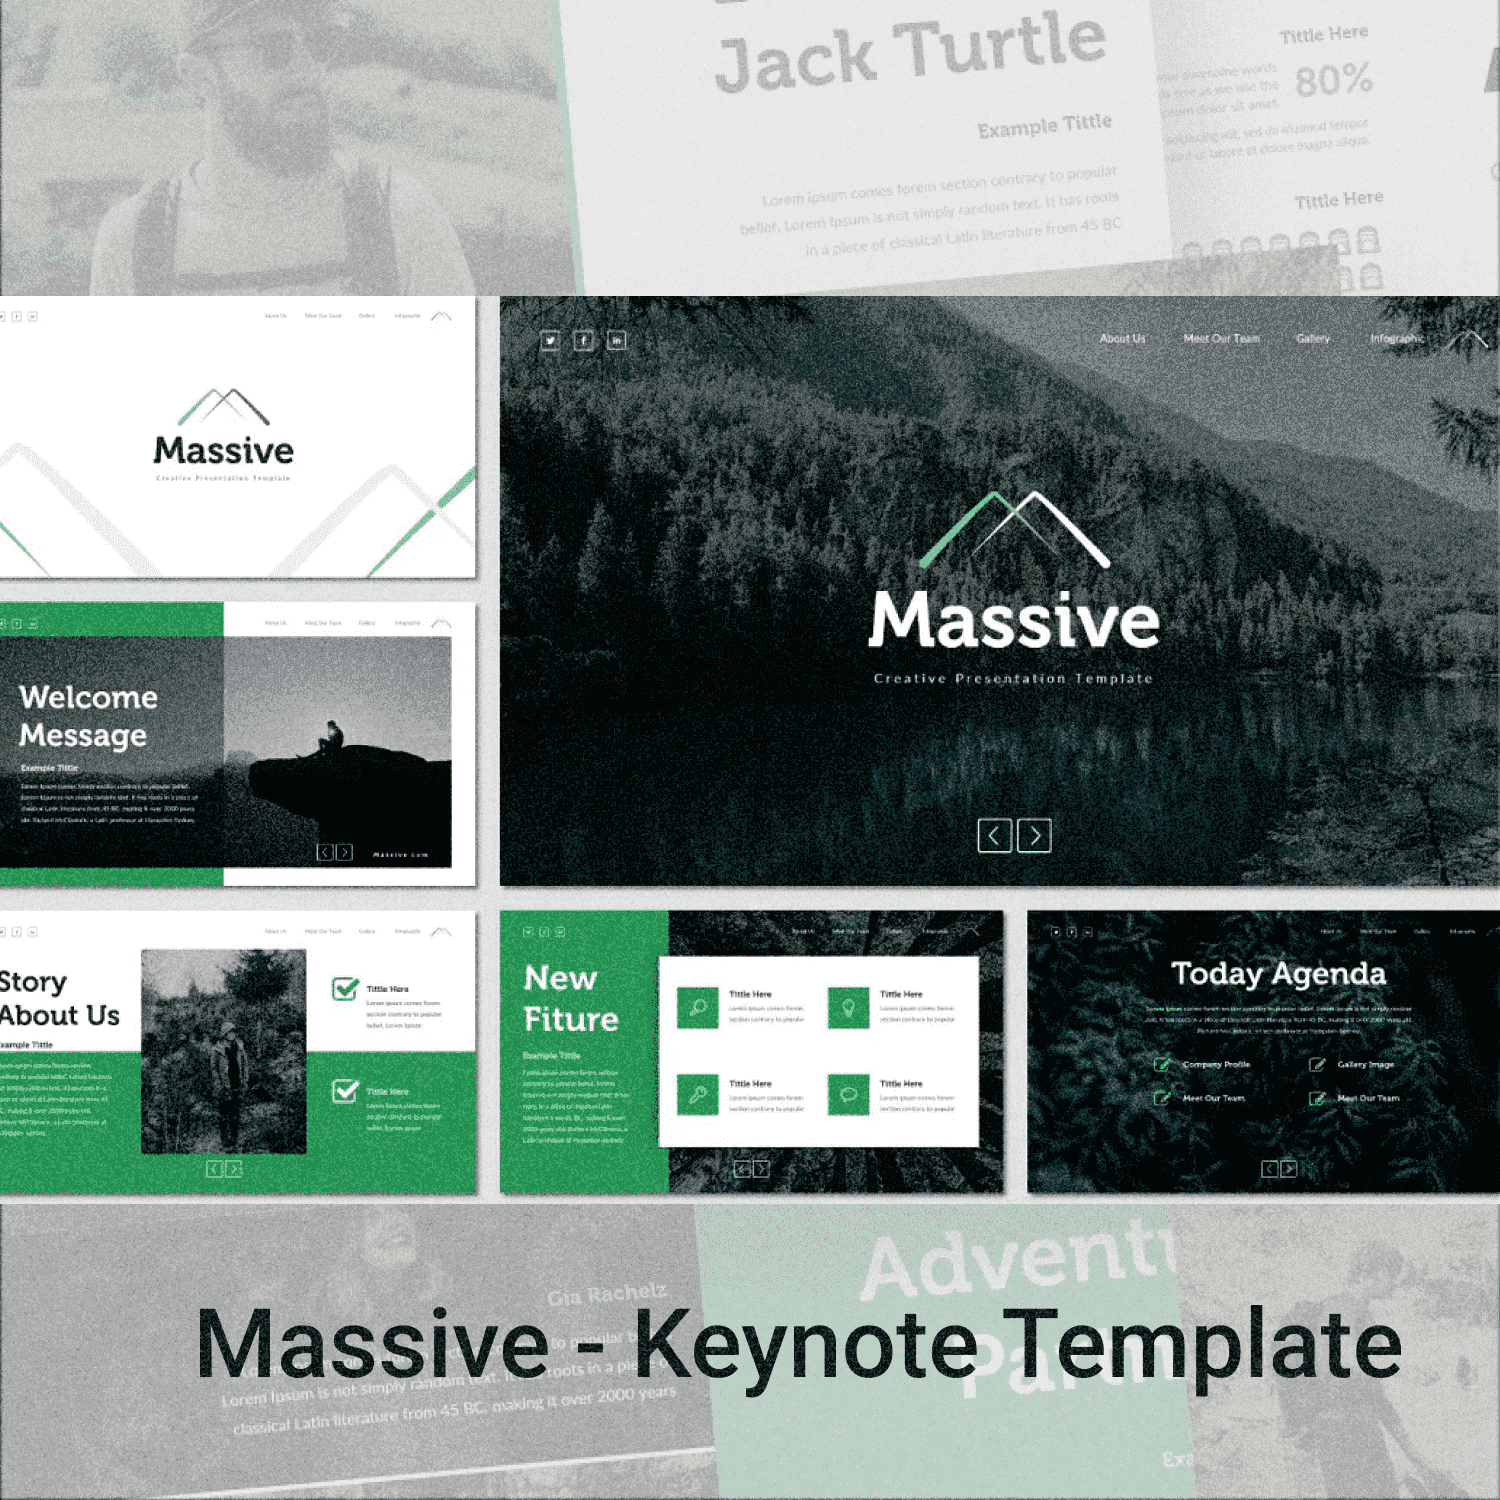 Massive - Keynote Template Preview.